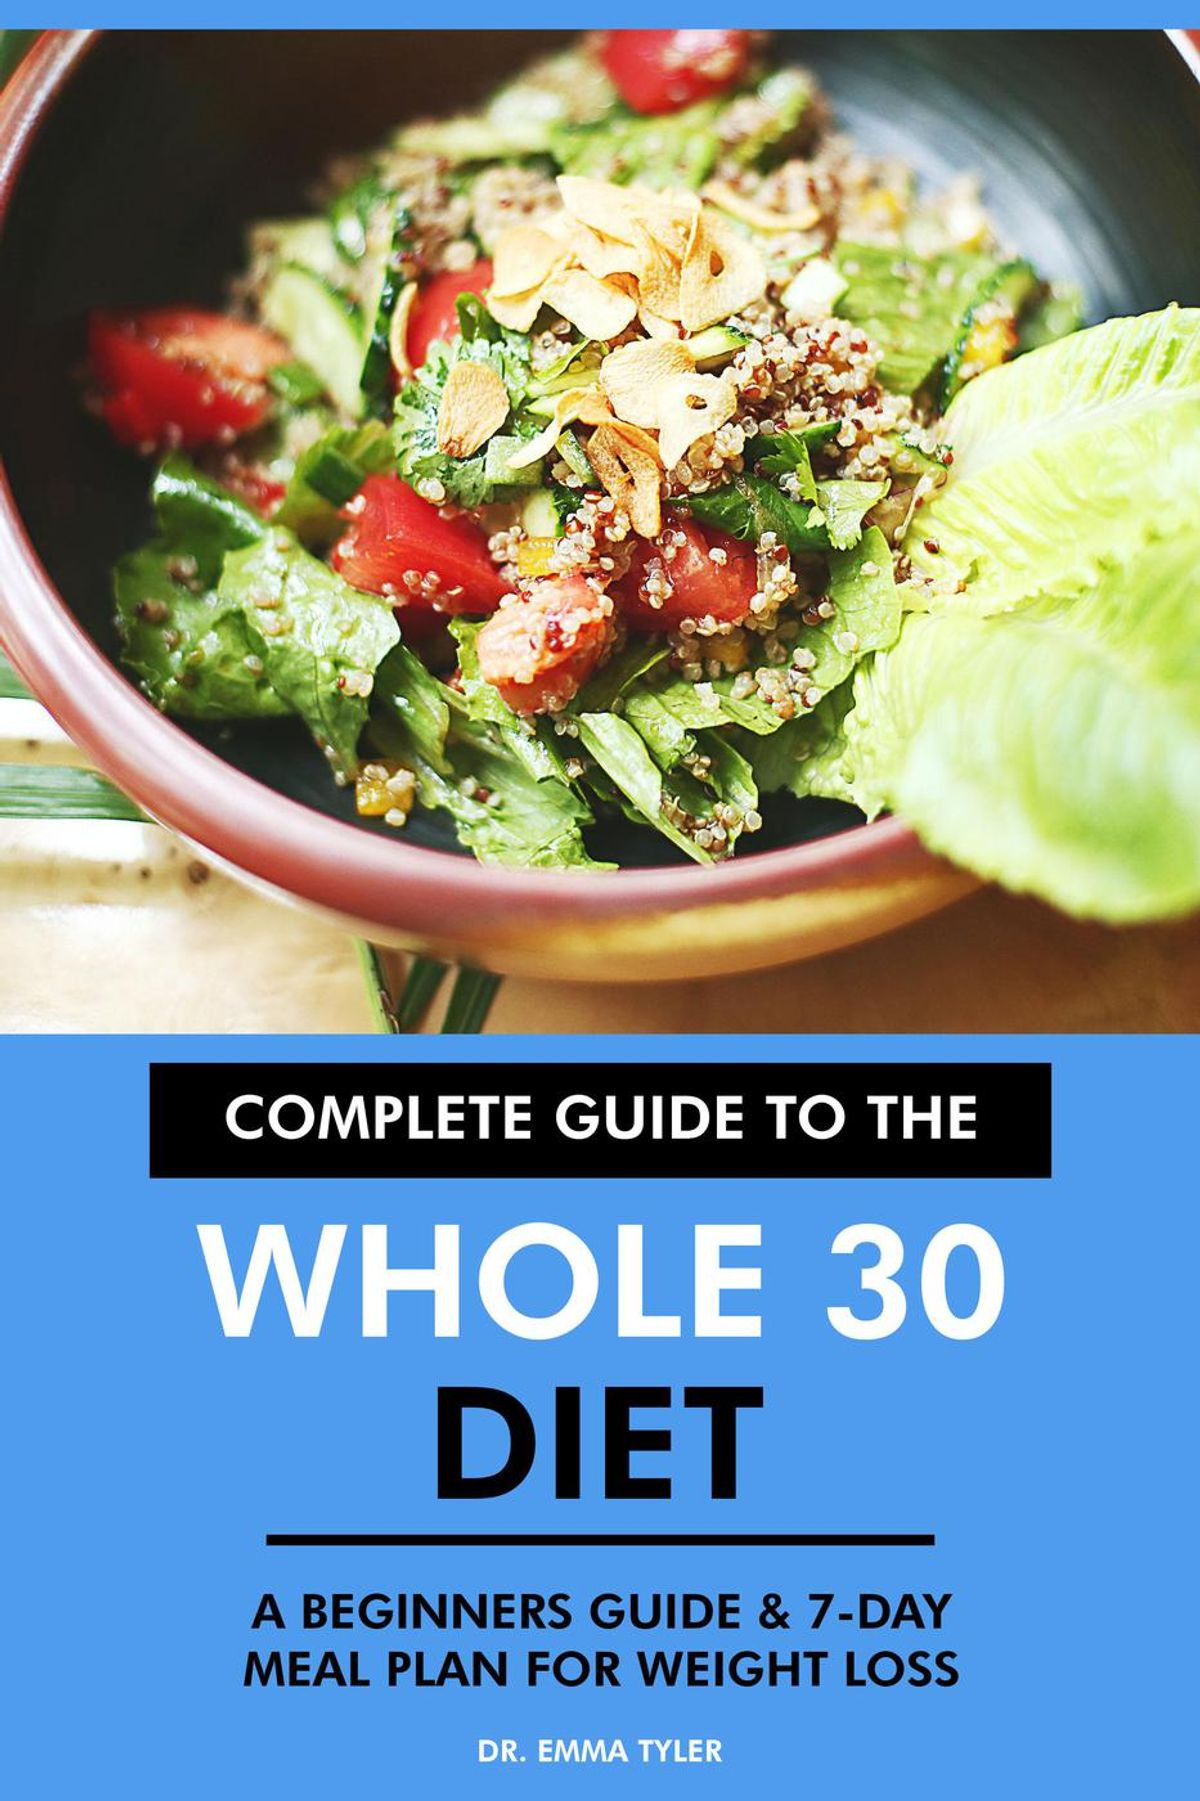 Whole 30 Weight Loss Meal Plan
 plete Guide to the Whole 30 Diet A Beginners Guide & 7